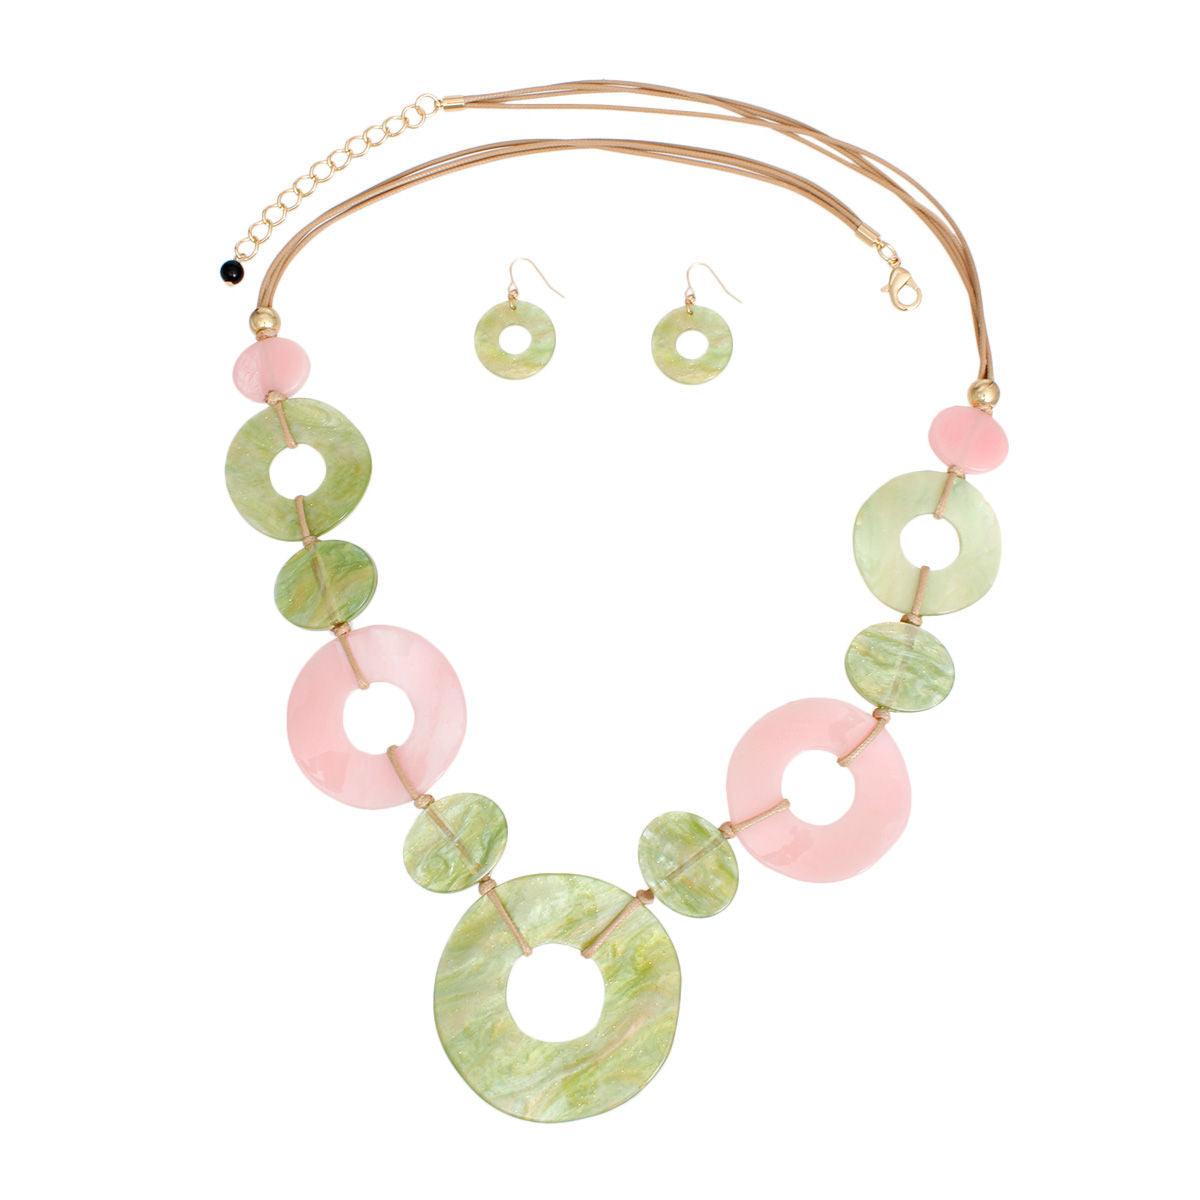 Stylish Multicolor Ring Necklace & Earrings Set - Fashion Jewelry